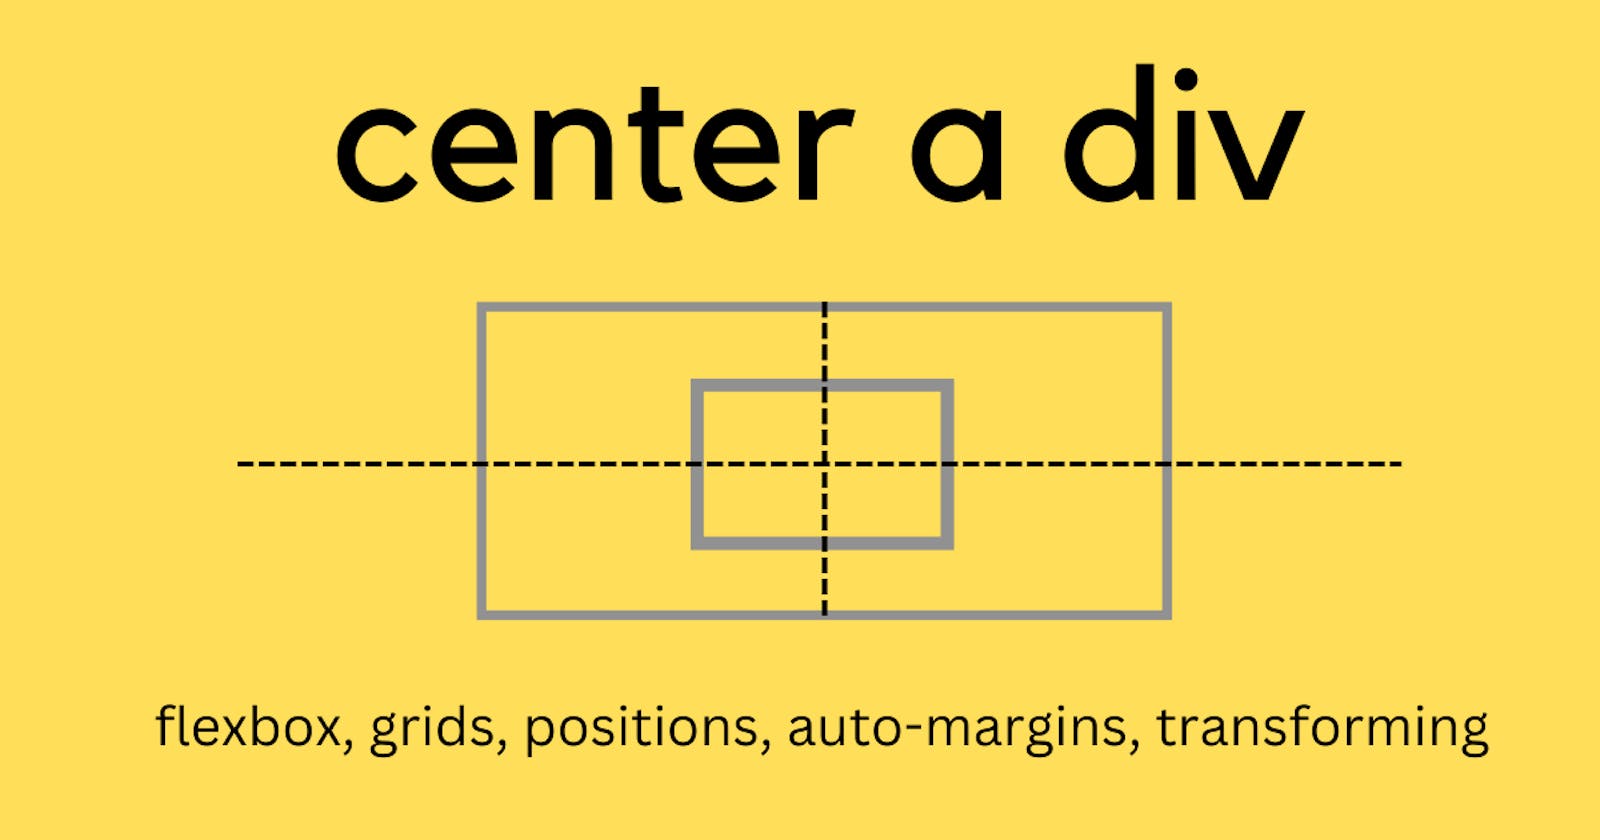 Centering my div in 10 different ways